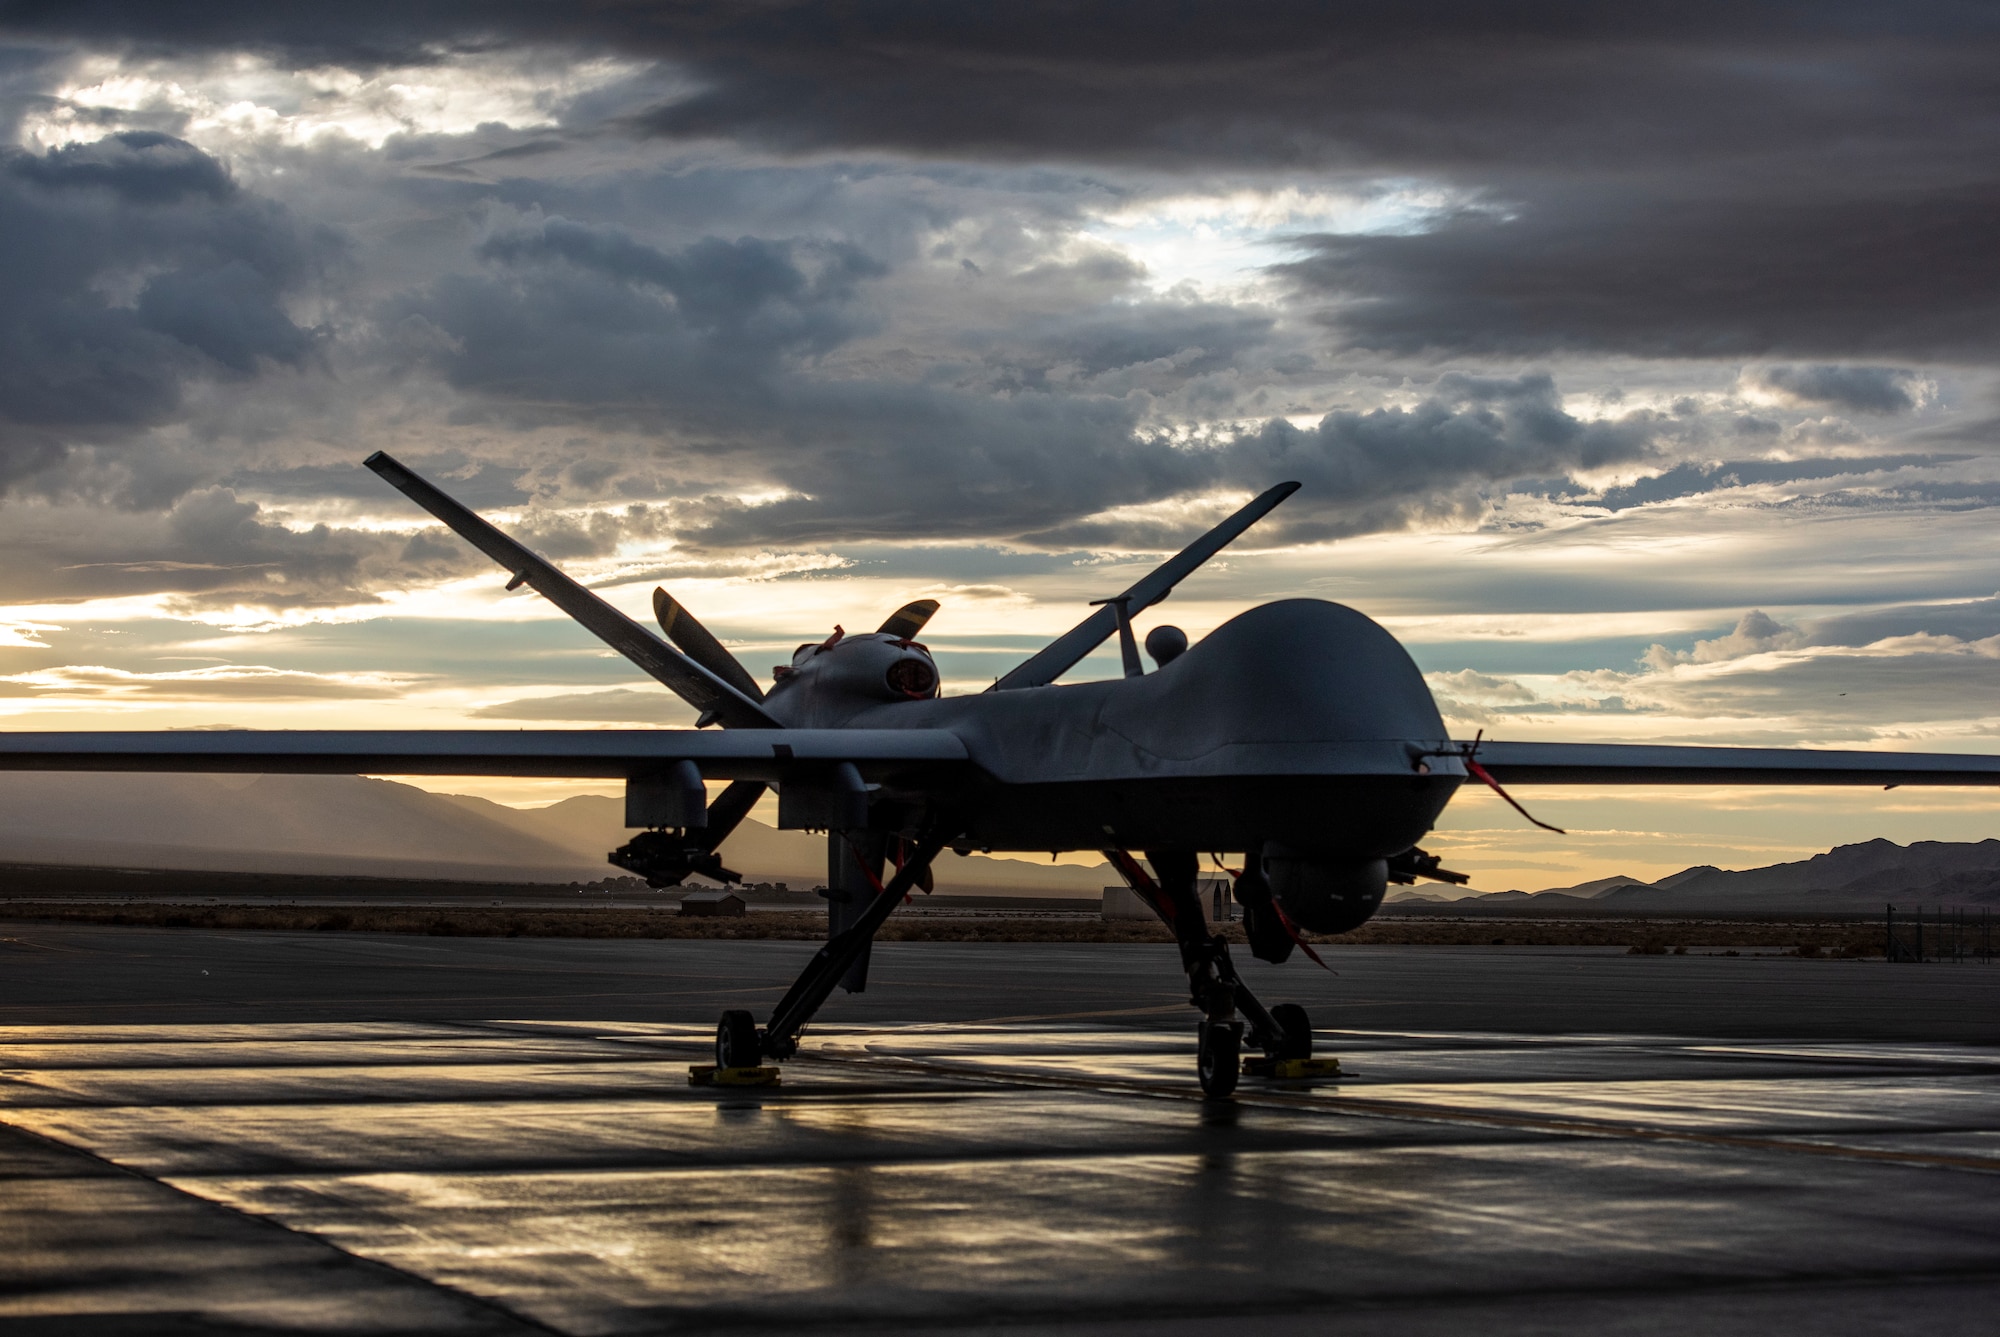 An MQ-9 Reaper sits on the flight line as the sun sets at Creech Air Force Base